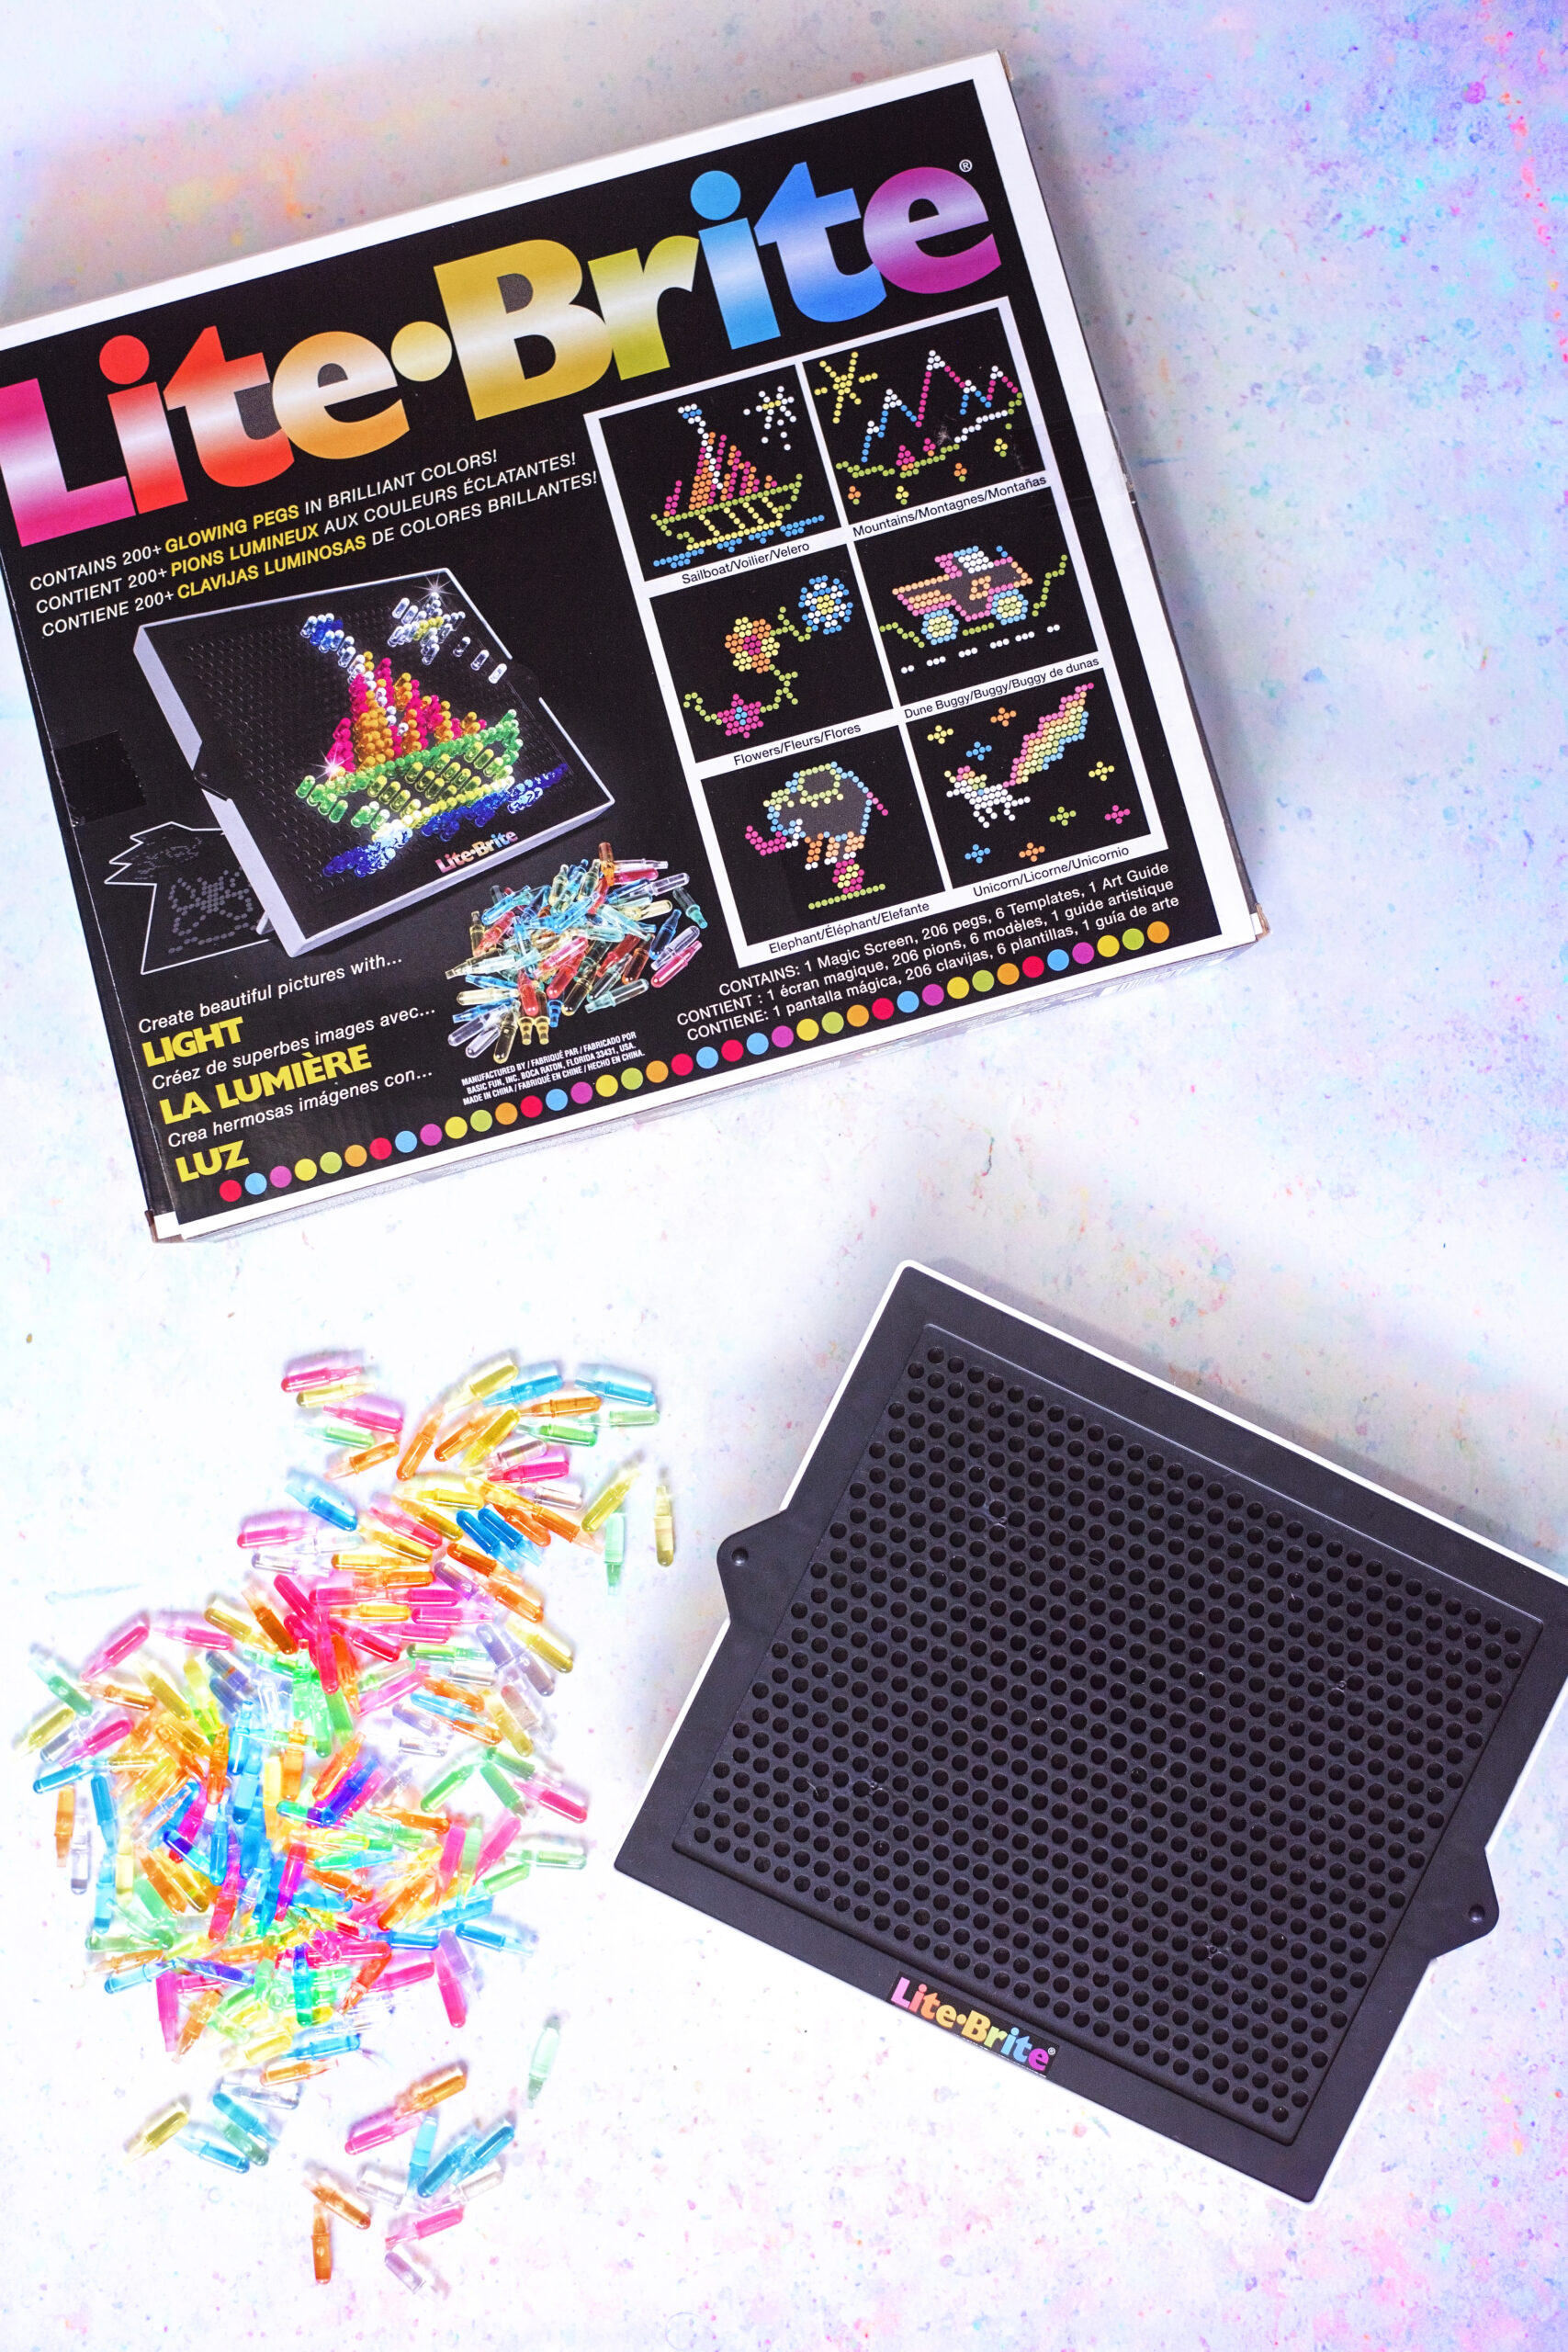 lite-brite-classic-set-from-basic-fun-christmas-messages-made-fun